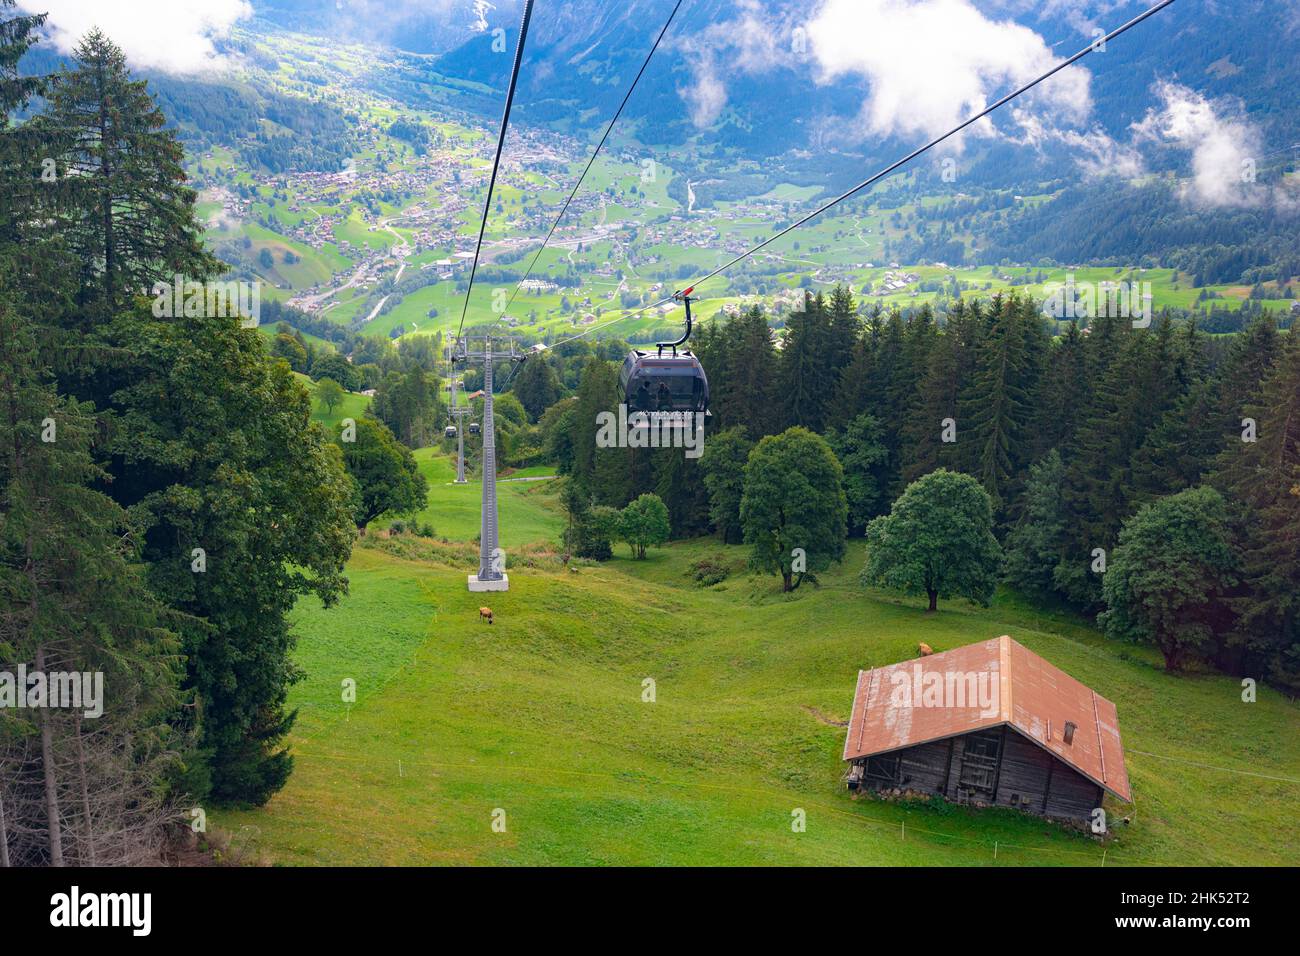 Cable car uphill among green alpine meadows and forest, Grindelwald, Mannlichen, Jungfrau Region, Bern Canton, Swiss Alps, Switzerland, Europe Stock Photo